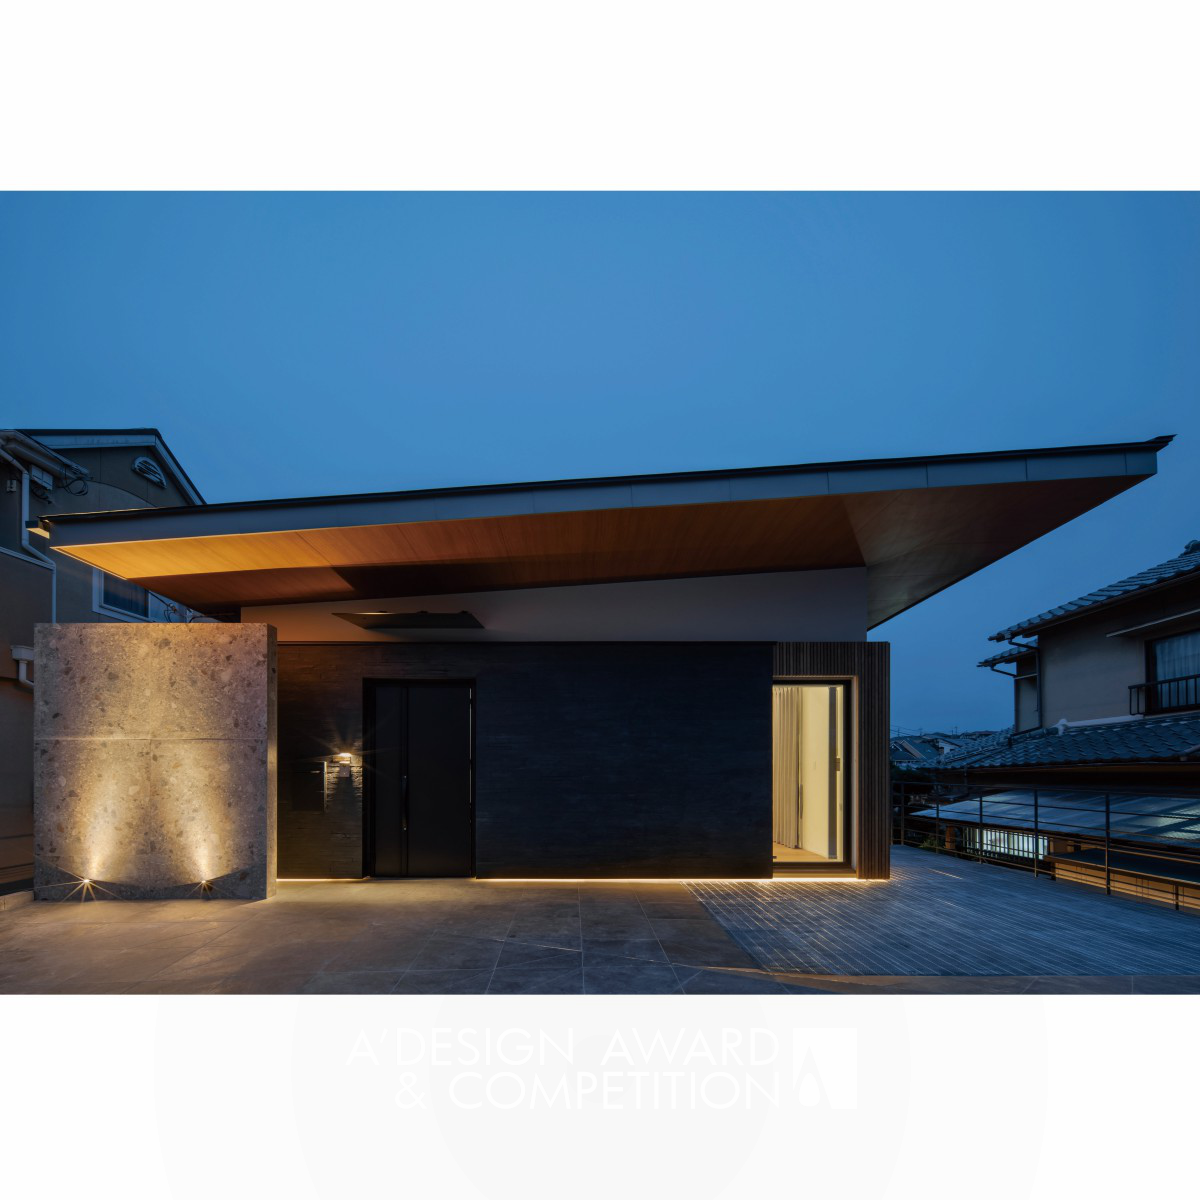 SHUNSUKE OHE wins Bronze at the prestigious A' Architecture, Building and Structure Design Award with Majestic Residential House.